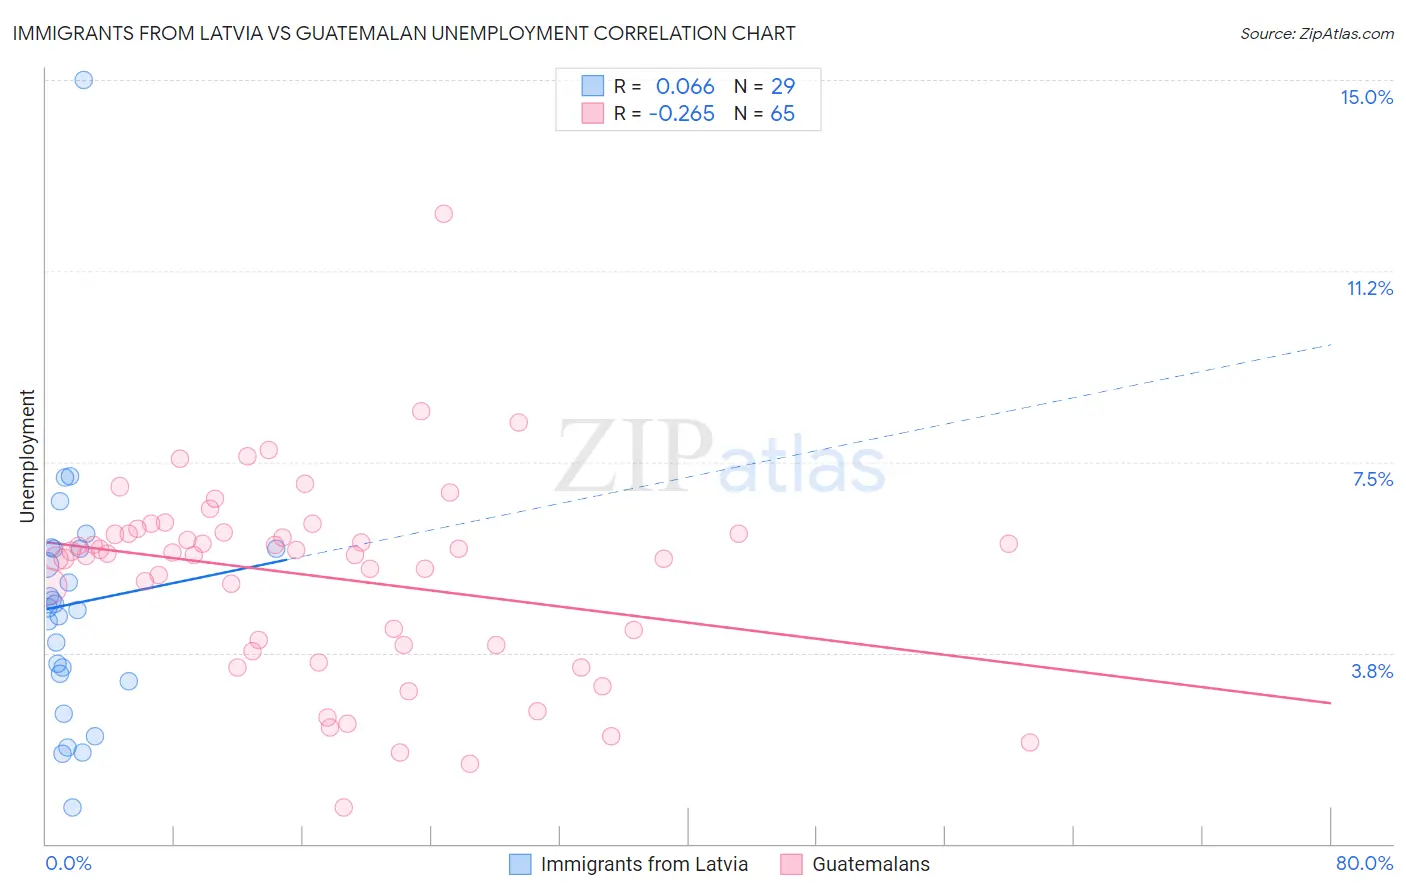 Immigrants from Latvia vs Guatemalan Unemployment